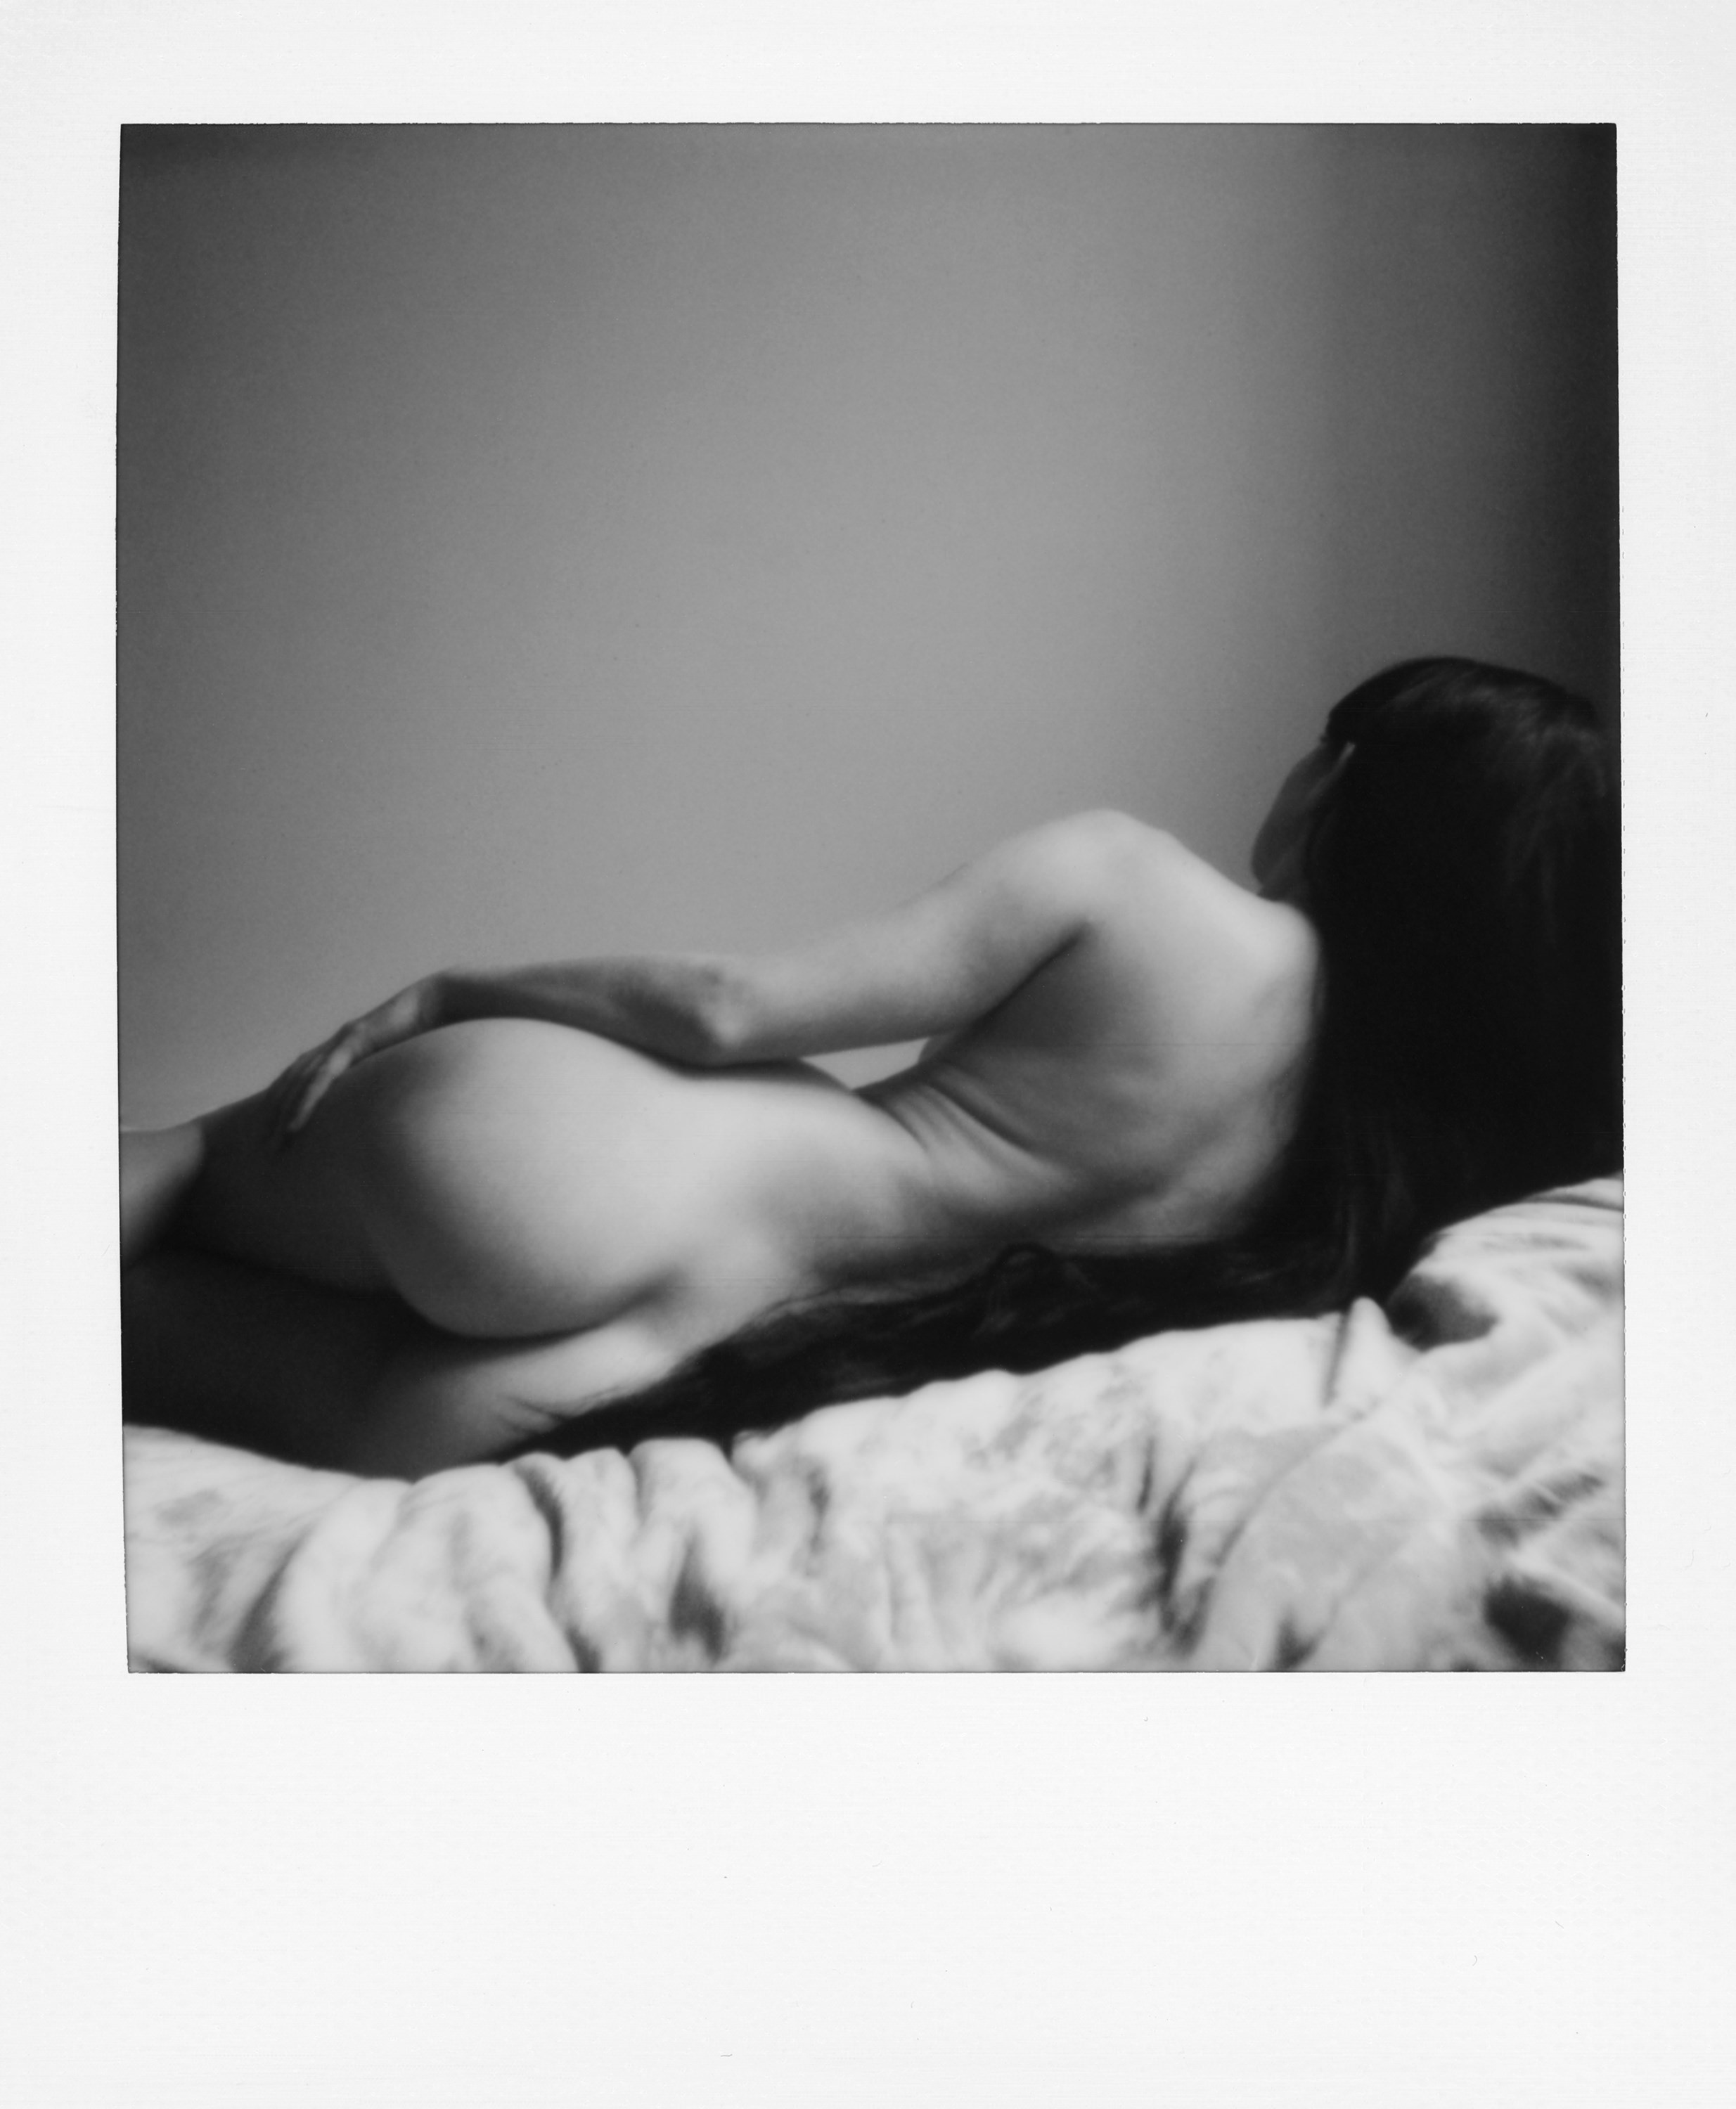 Polaroid Nudes - A Series of Intimate Nude Polaroids Taken During Lockdown | AnOther